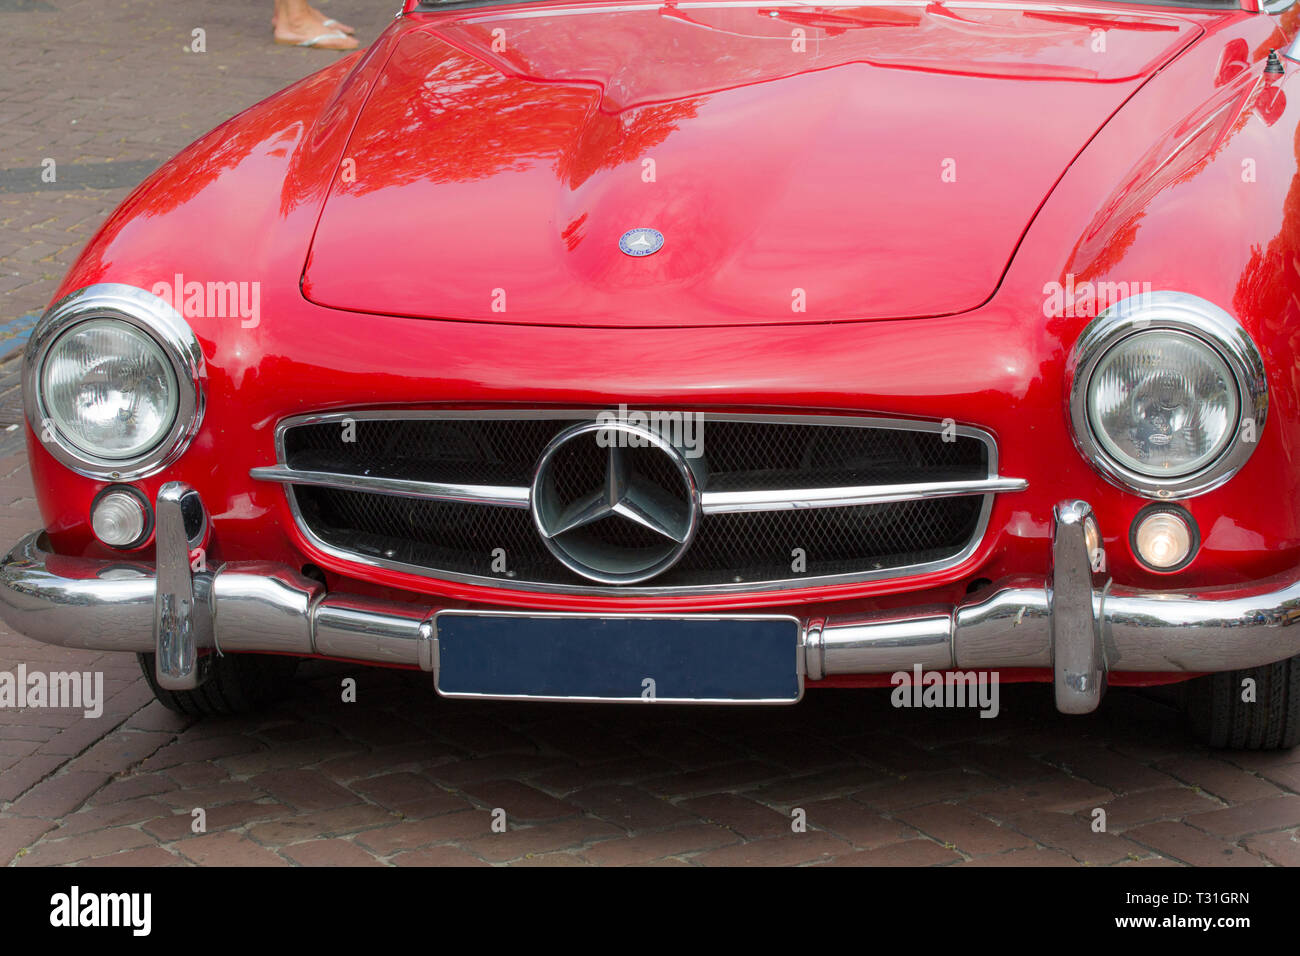 Page 2 - Front View Of Mercedes Convertible Or Cabriolet High Resolution  Stock Photography and Images - Alamy